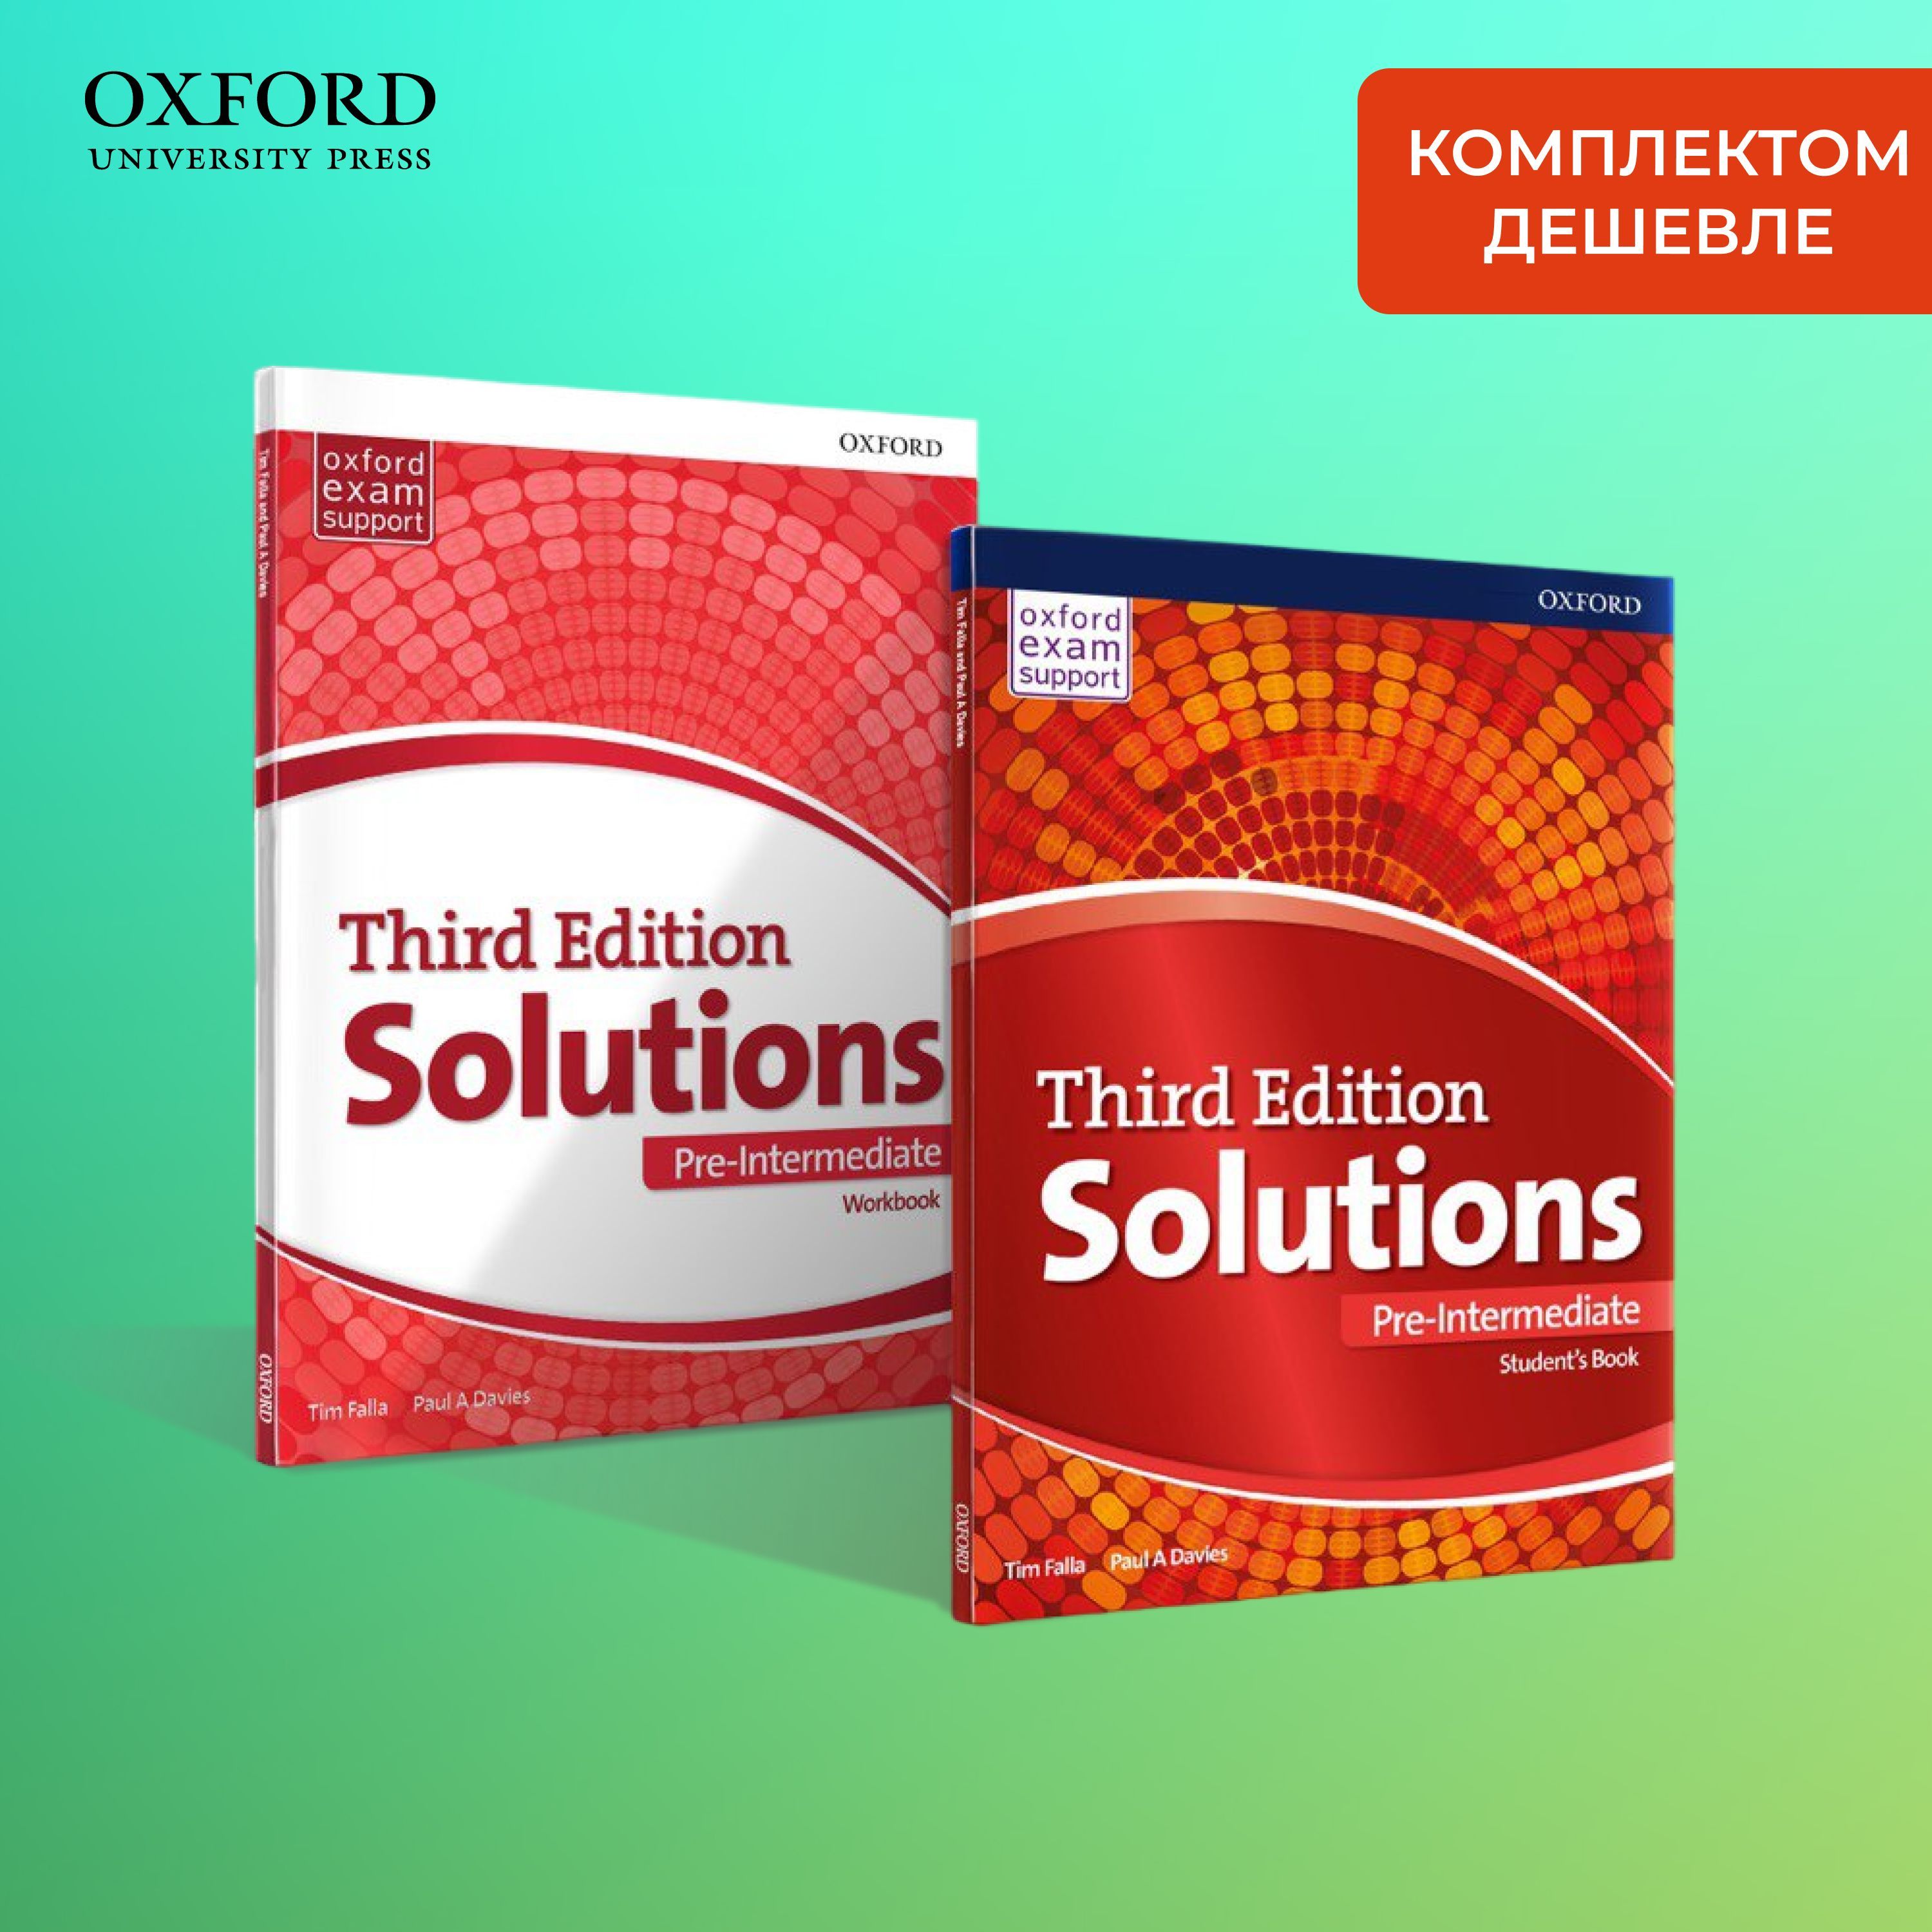 Solutions pre intermediate 3rd edition students book. Solutions pre-Intermediate 3rd Edition. Third Edition solutions Intermediate student's book. Solutions pre-Intermediate 3rd Edition Workbook. Solutions pre Intermediate 3rd Edition Tests pdf.